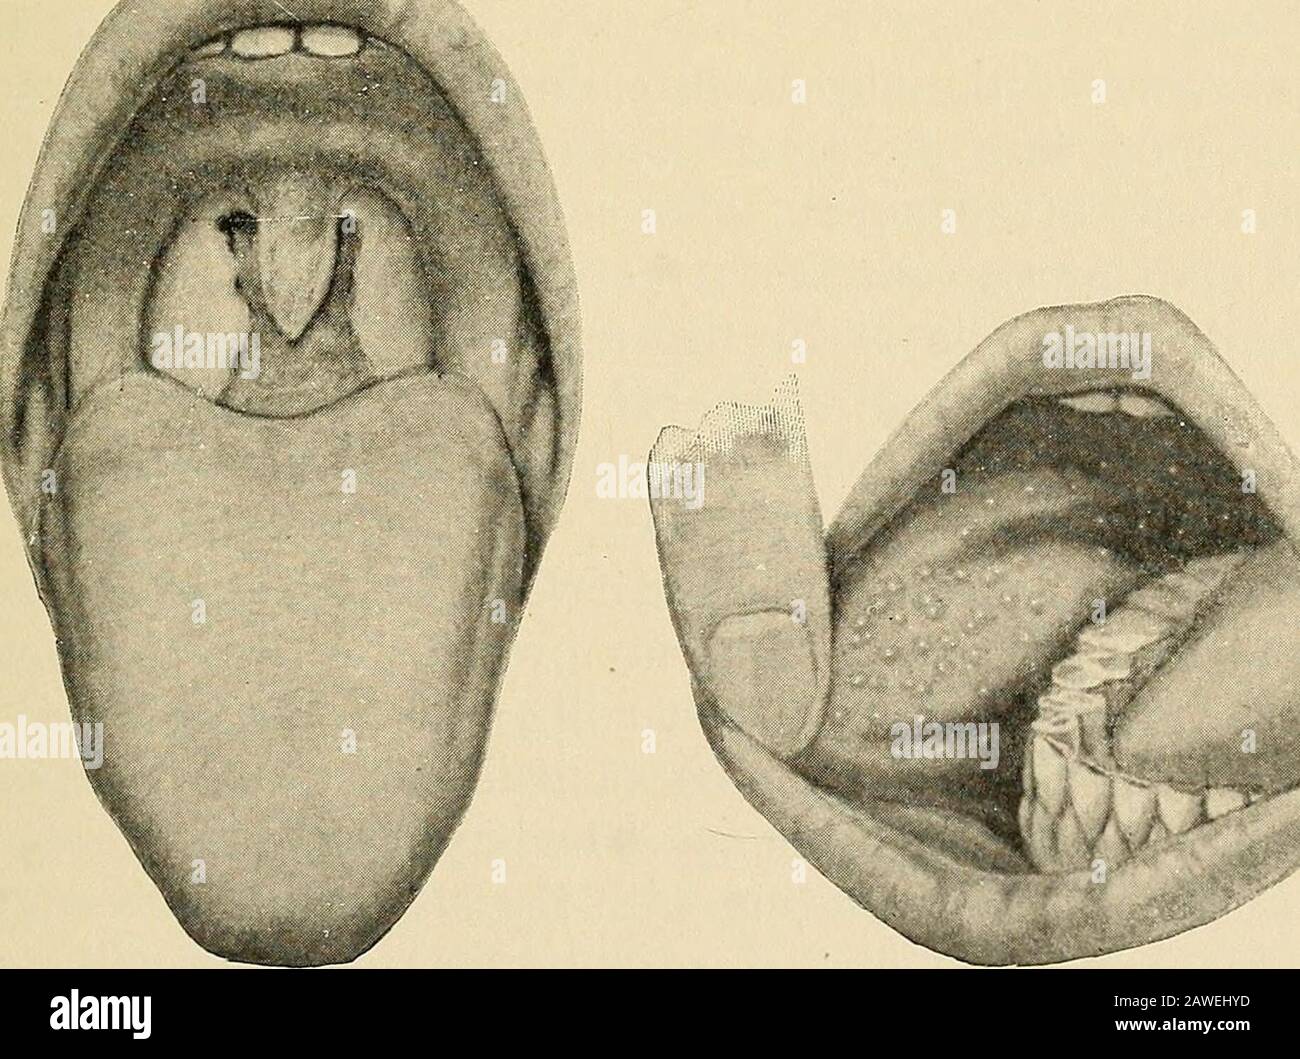 Oral surgery; a text-book on general surgery and medicine as applied to dentistry . Fig. 21.—Strawberry Tongue. Fig. 22.—Follicular Tonsilitis.. Fig. 2.3.—Diphtheritic Throat. Fig. 24.—Kopliks Spots. (Palisade Mfg. Co.) 138 MOUTH LESIONS ing catarrhs of the respiratory tract. Catarrhal inflamma-tions of the skin may alternate with those of the mucousmembranes, the one being active while the other is held inabeyance. This view is upheld by Broca, and it may bedue to the same pathological law which governs the sub-sidence of an inflammation in one organ while it is activein another. The absence Stock Photo